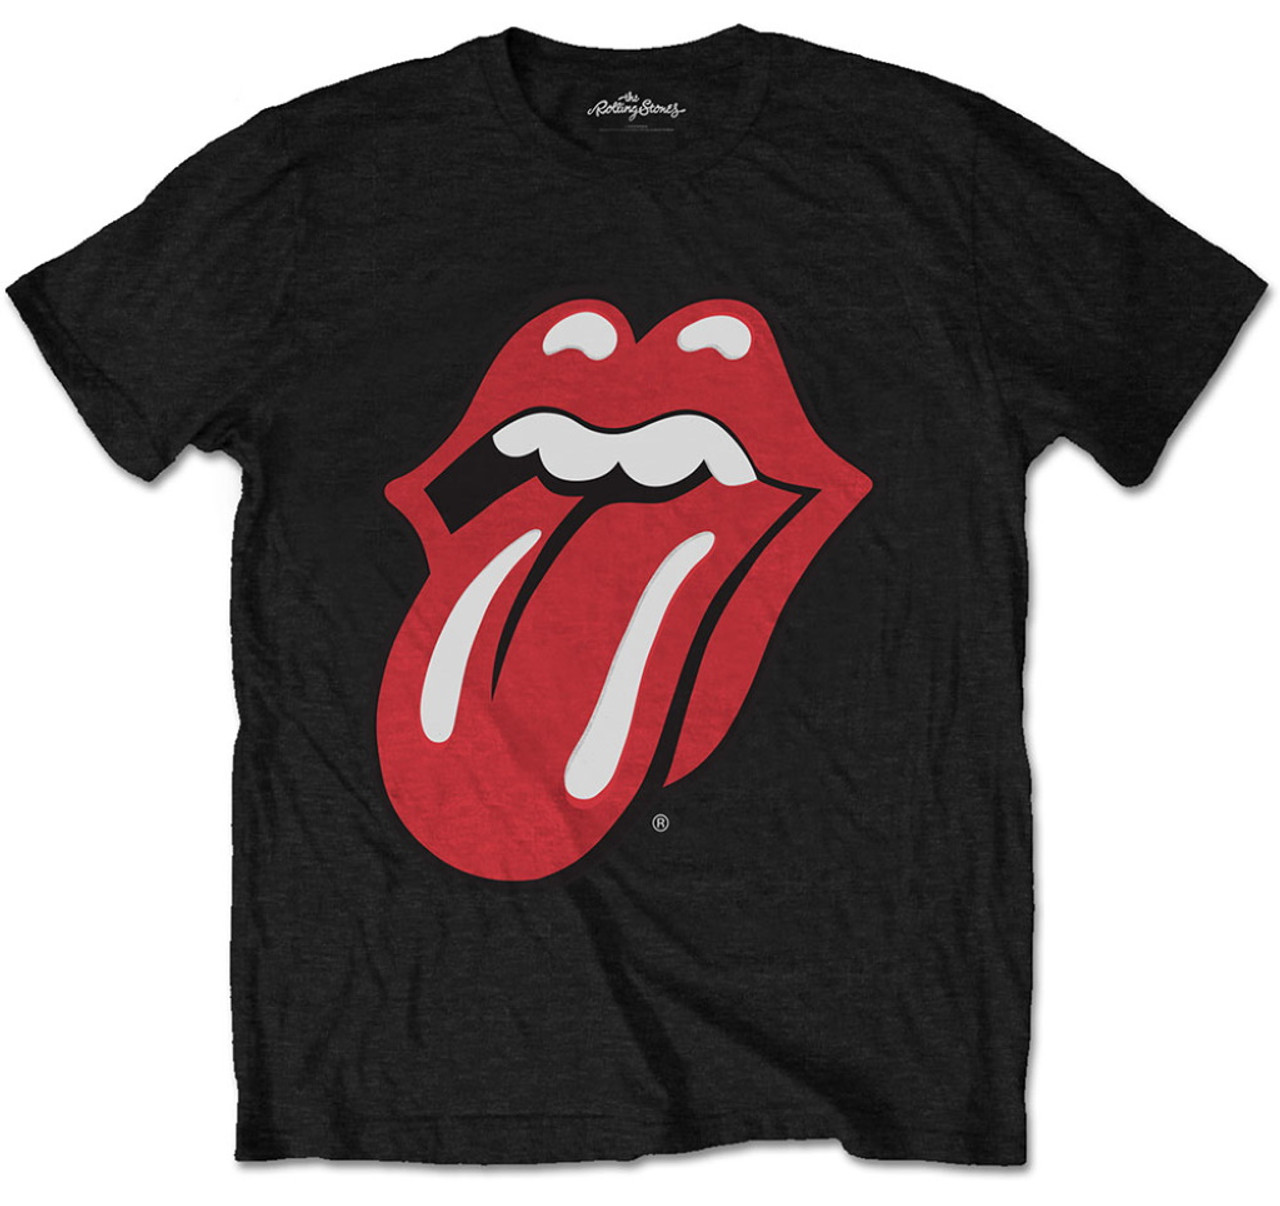 The Rolling Stones 'Classic Tongue' (Packaged Black) Kids T-Shirt